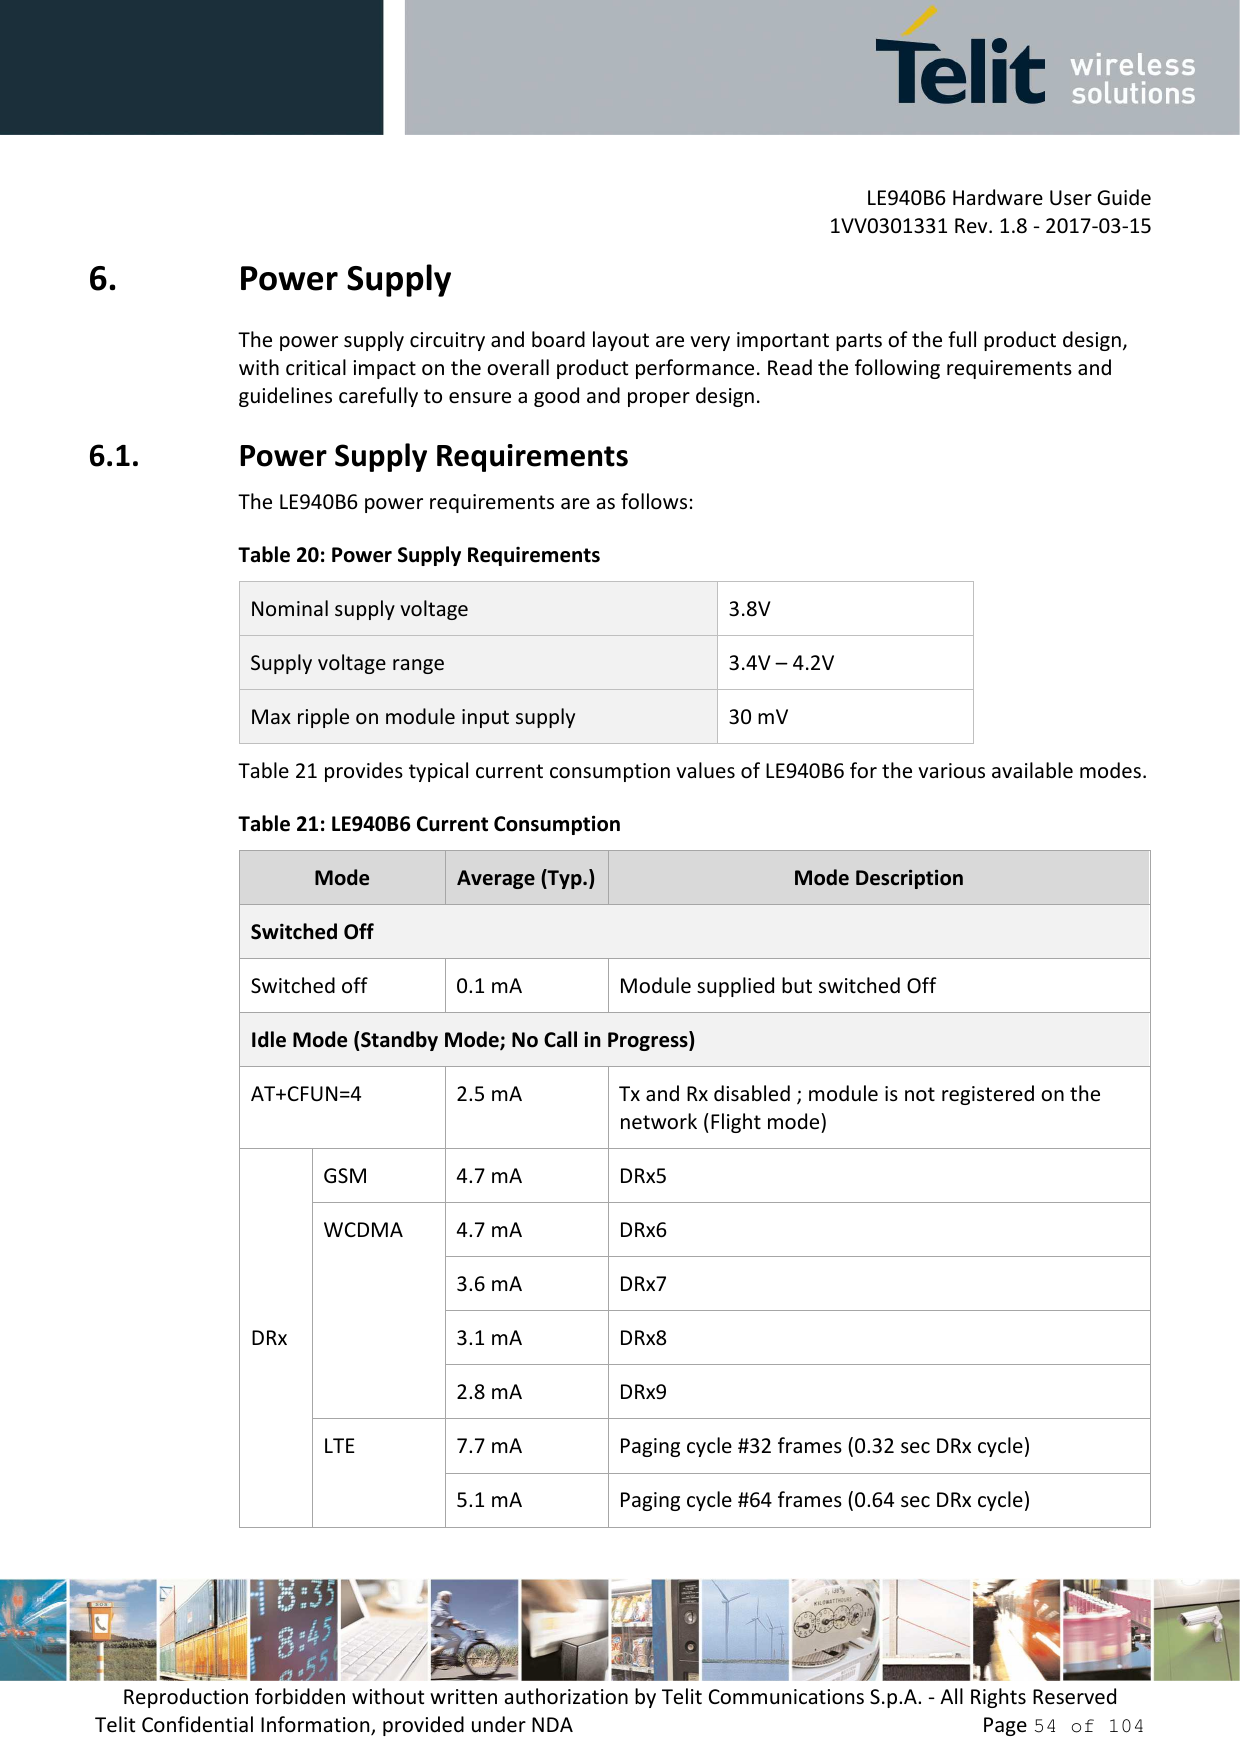         LE940B6 Hardware User Guide     1VV0301331 Rev. 1.8 - 2017-03-15 Reproduction forbidden without written authorization by Telit Communications S.p.A. - All Rights Reserved Telit Confidential Information, provided under NDA                 Page 54 of 104 6. Power Supply The power supply circuitry and board layout are very important parts of the full product design, with critical impact on the overall product performance. Read the following requirements and guidelines carefully to ensure a good and proper design. 6.1. Power Supply Requirements The LE940B6 power requirements are as follows: Table 20: Power Supply Requirements Nominal supply voltage  3.8V Supply voltage range  3.4V – 4.2V Max ripple on module input supply  30 mV Table 21 provides typical current consumption values of LE940B6 for the various available modes. Table 21: LE940B6 Current Consumption Mode  Average (Typ.) Mode Description Switched Off Switched off  0.1 mA  Module supplied but switched Off Idle Mode (Standby Mode; No Call in Progress) AT+CFUN=4  2.5 mA  Tx and Rx disabled ; module is not registered on the network (Flight mode)  DRx GSM  4.7 mA  DRx5 WCDMA  4.7 mA  DRx6 3.6 mA  DRx7 3.1 mA  DRx8 2.8 mA  DRx9 LTE  7.7 mA  Paging cycle #32 frames (0.32 sec DRx cycle) 5.1 mA  Paging cycle #64 frames (0.64 sec DRx cycle) 